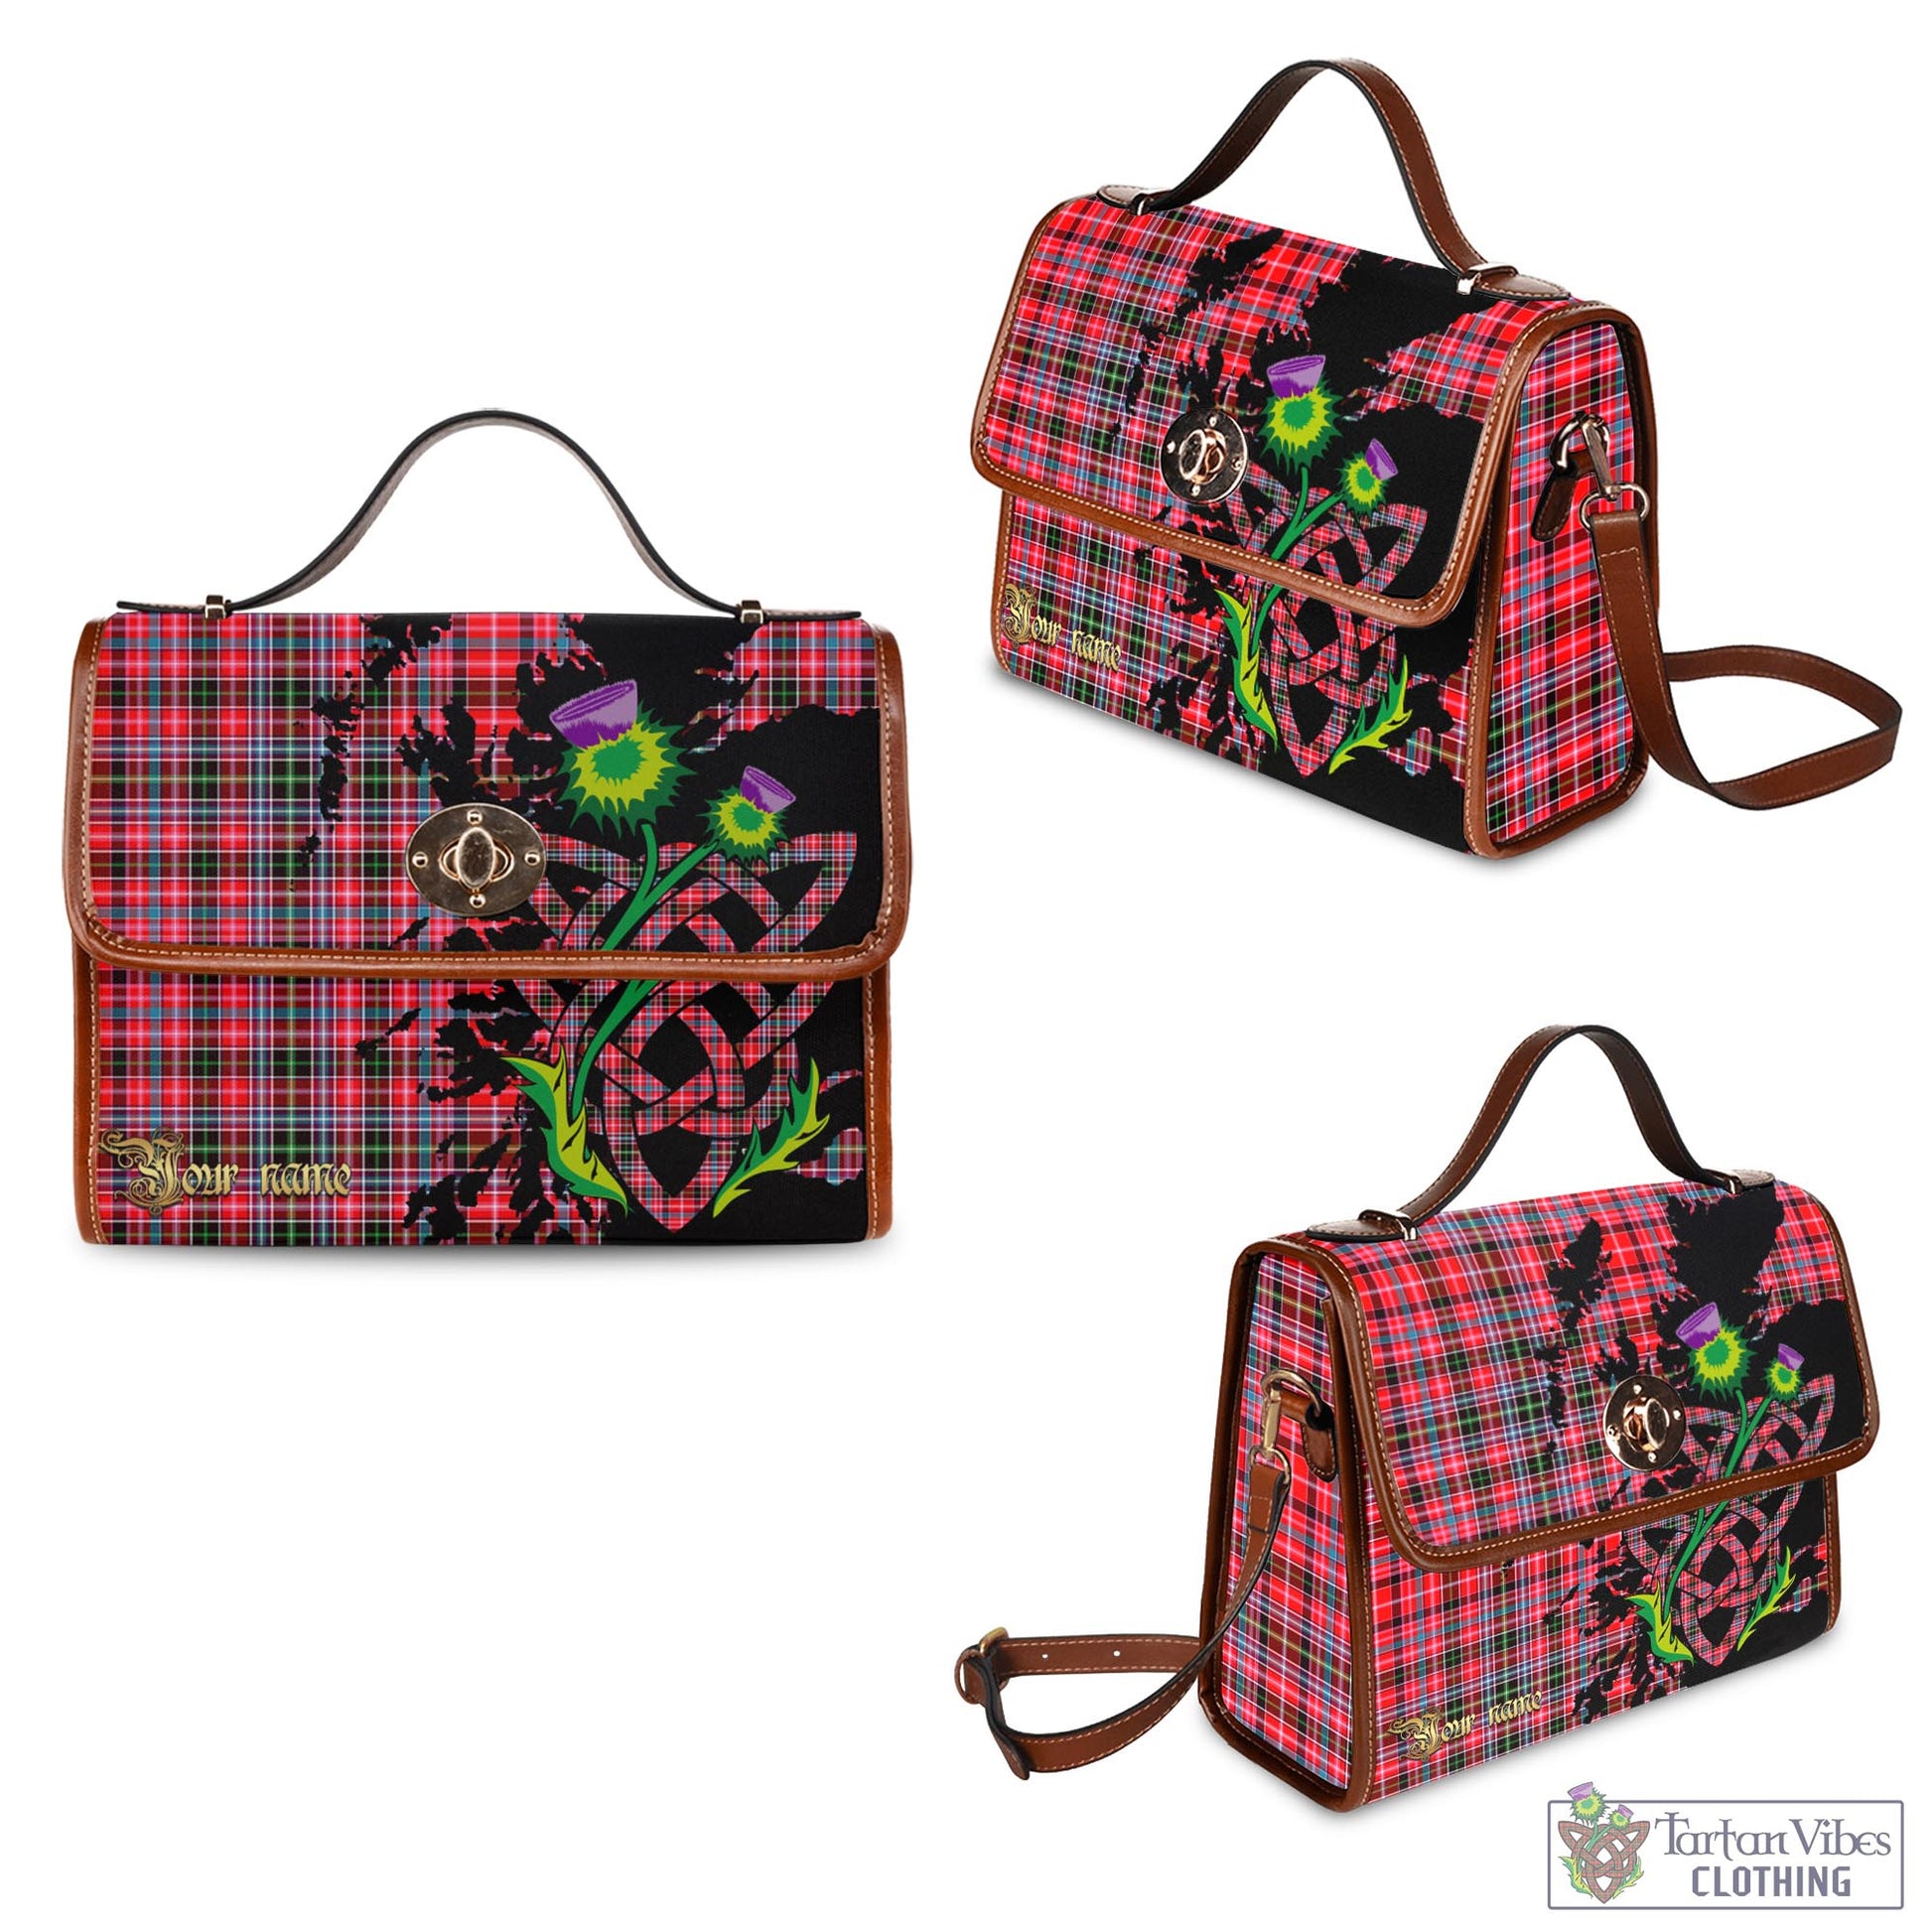 Tartan Vibes Clothing Aberdeen District Tartan Waterproof Canvas Bag with Scotland Map and Thistle Celtic Accents